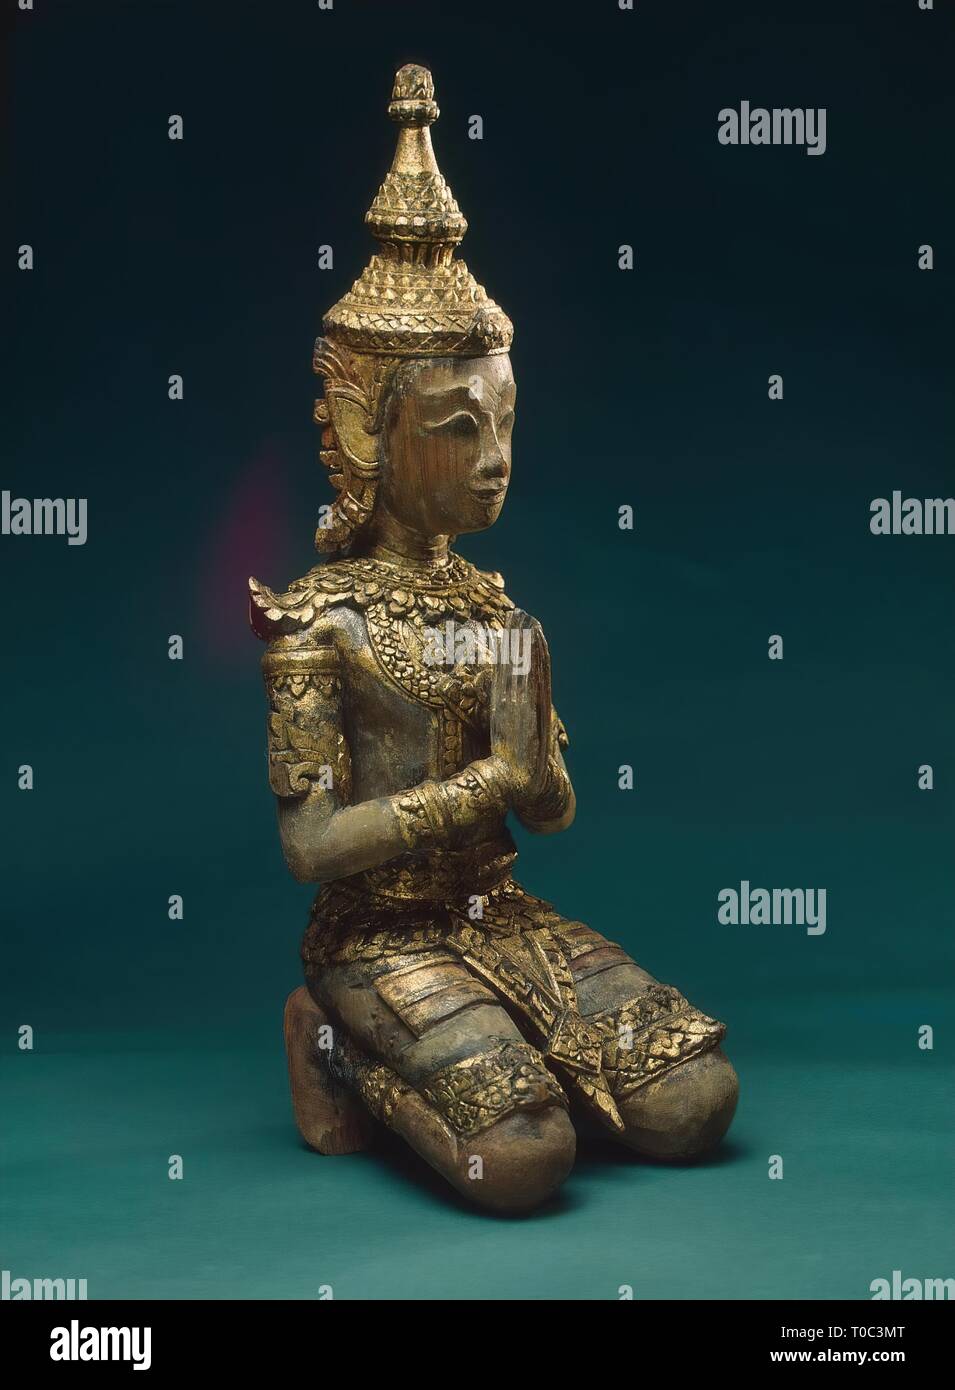 'Kneeling Adorer'. Siam (now Thailand). Bangkok art, Late 18th - early 19th century. Dimensions: h. 50,5 cm. Museum: State Hermitage, St. Petersburg. Stock Photo